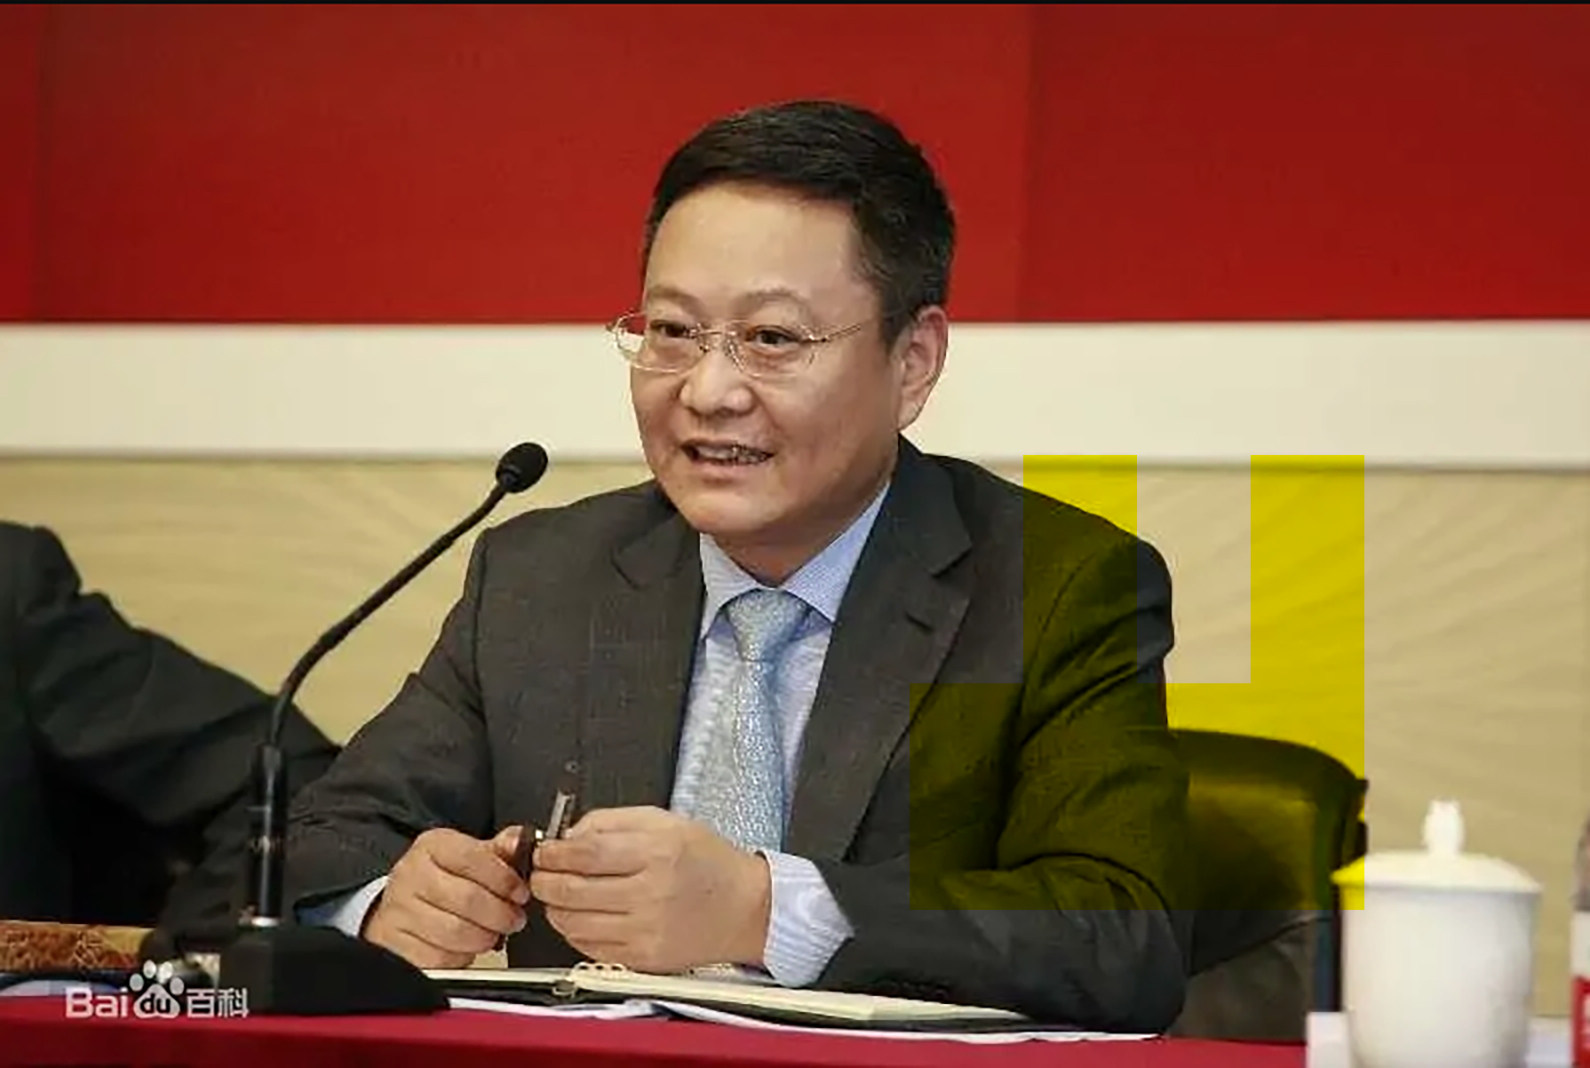 Tian Huiyu, former president of China Merchants Bank, was ousted from his post in April and expelled from the Communist Party last month. Photo: Handout